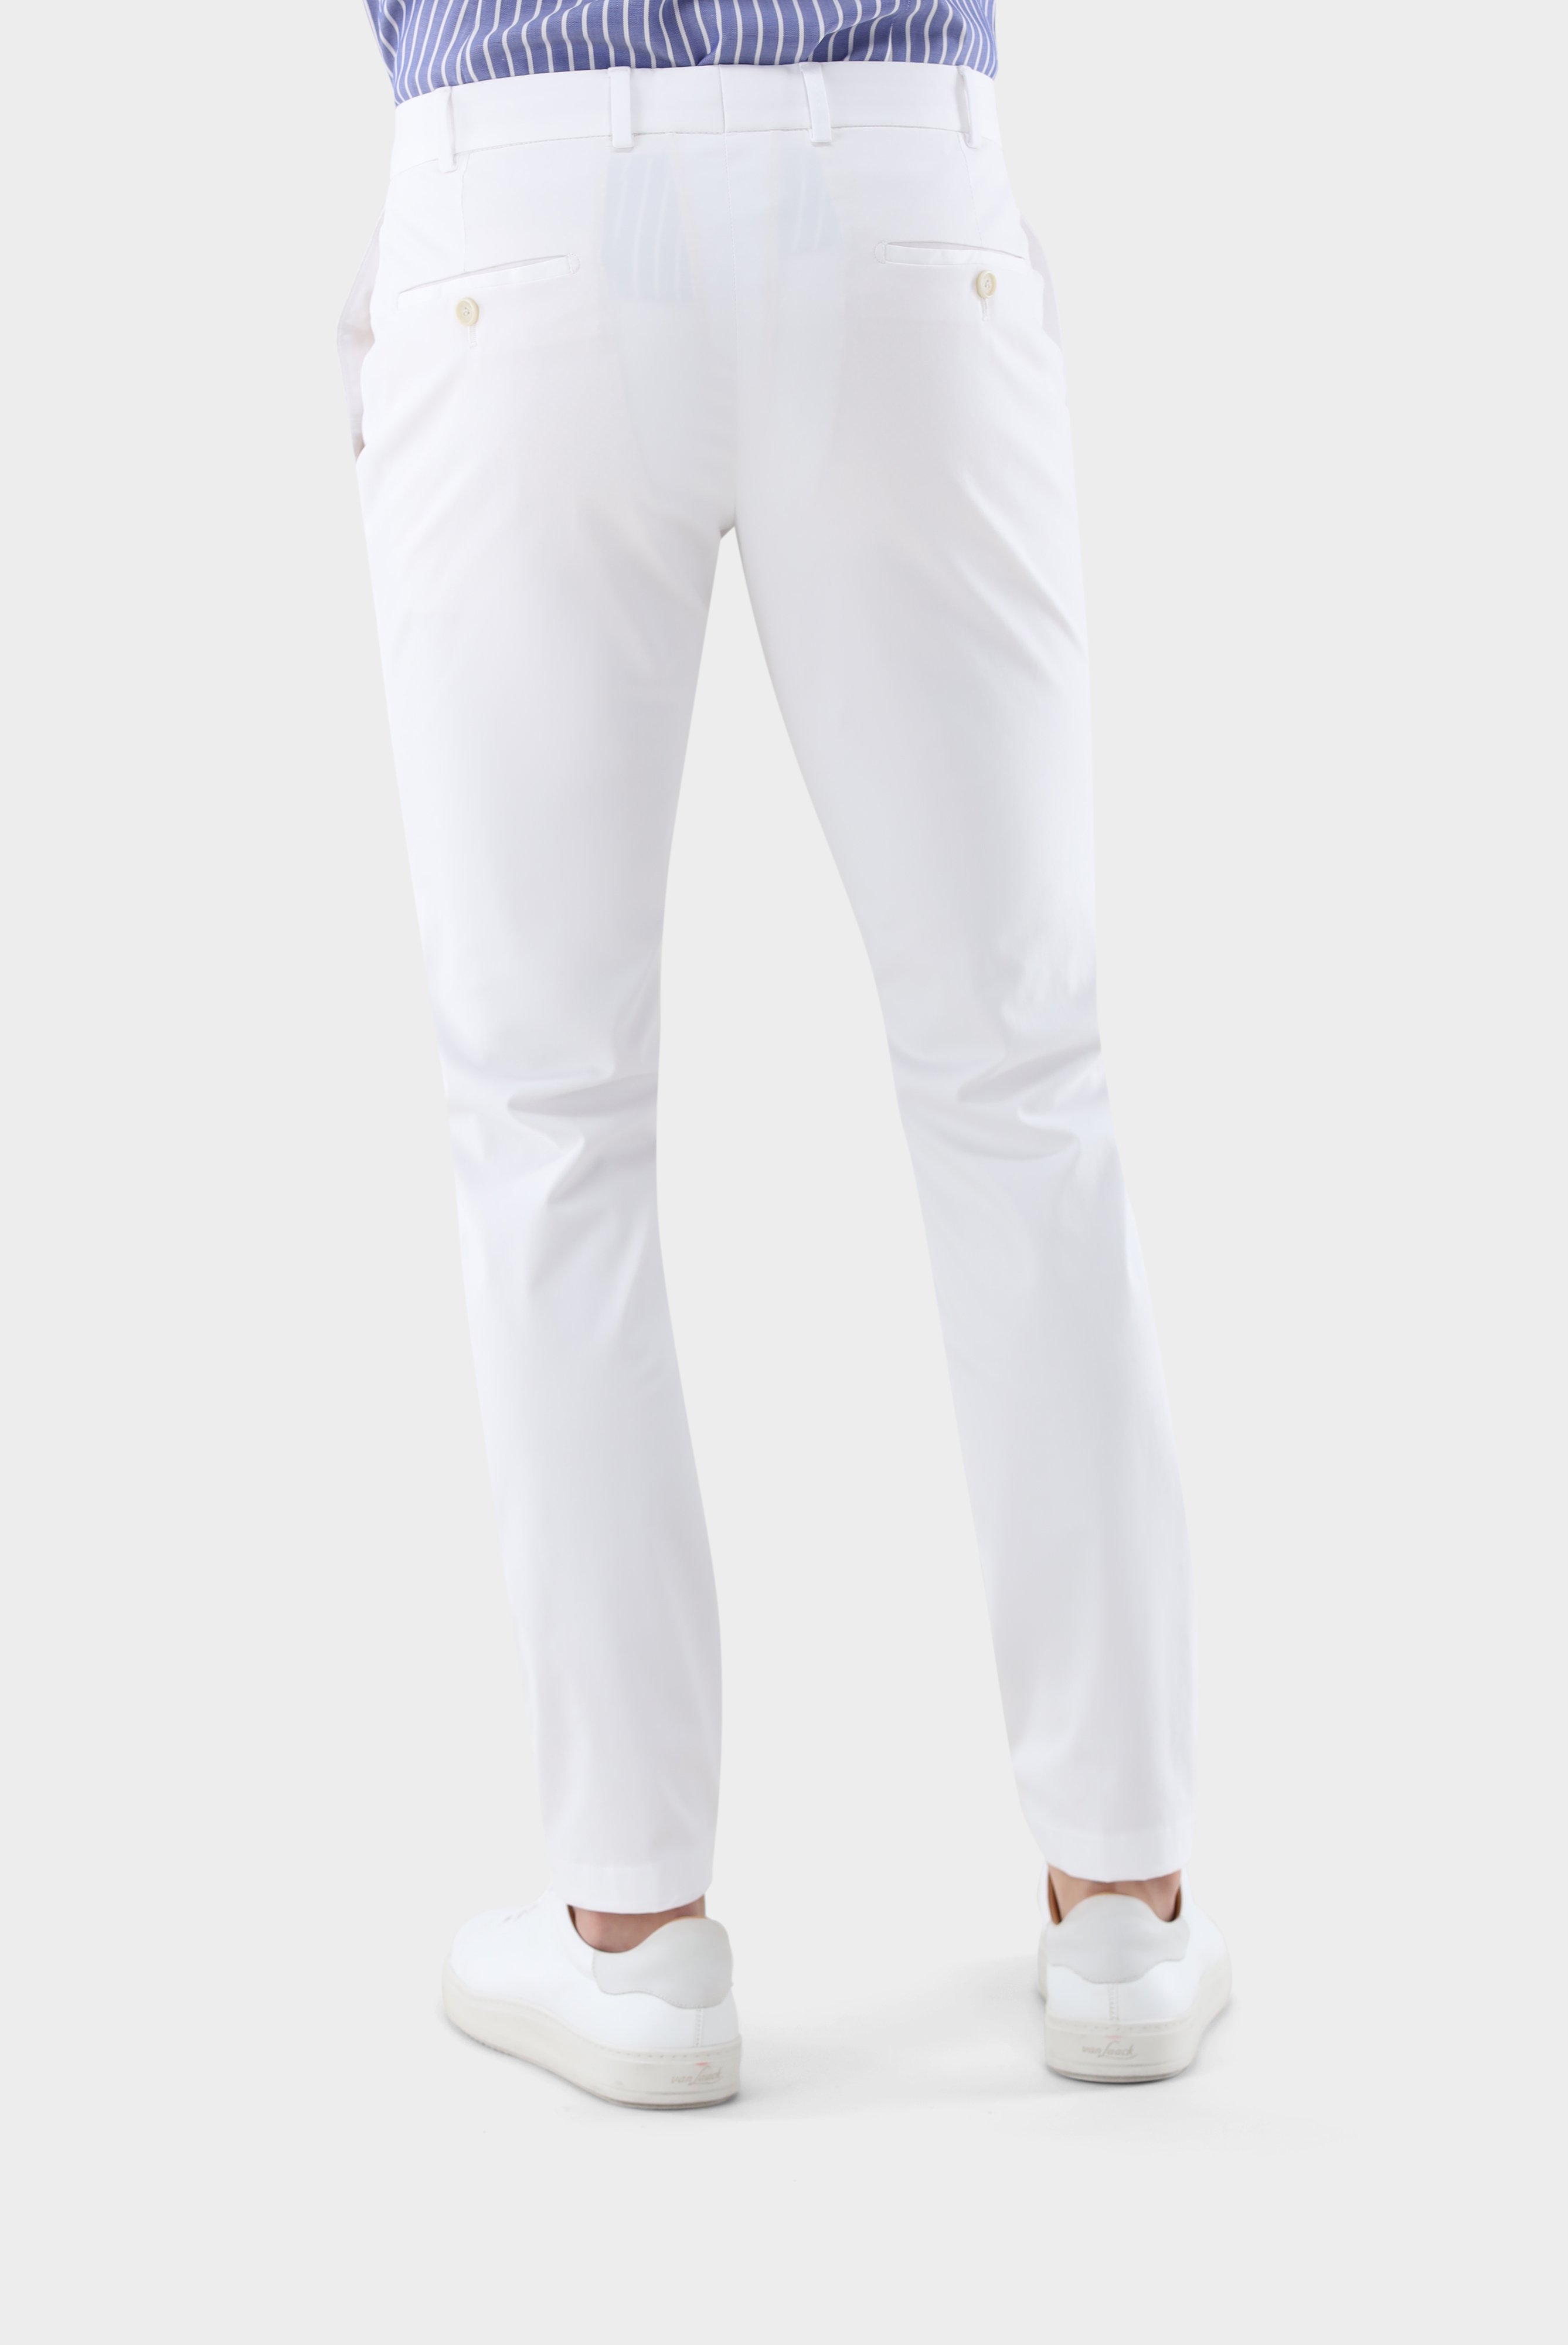 Jeans & Trousers+Cotton with Stretch Tapered Chinos+80.7858..J00151.000.50